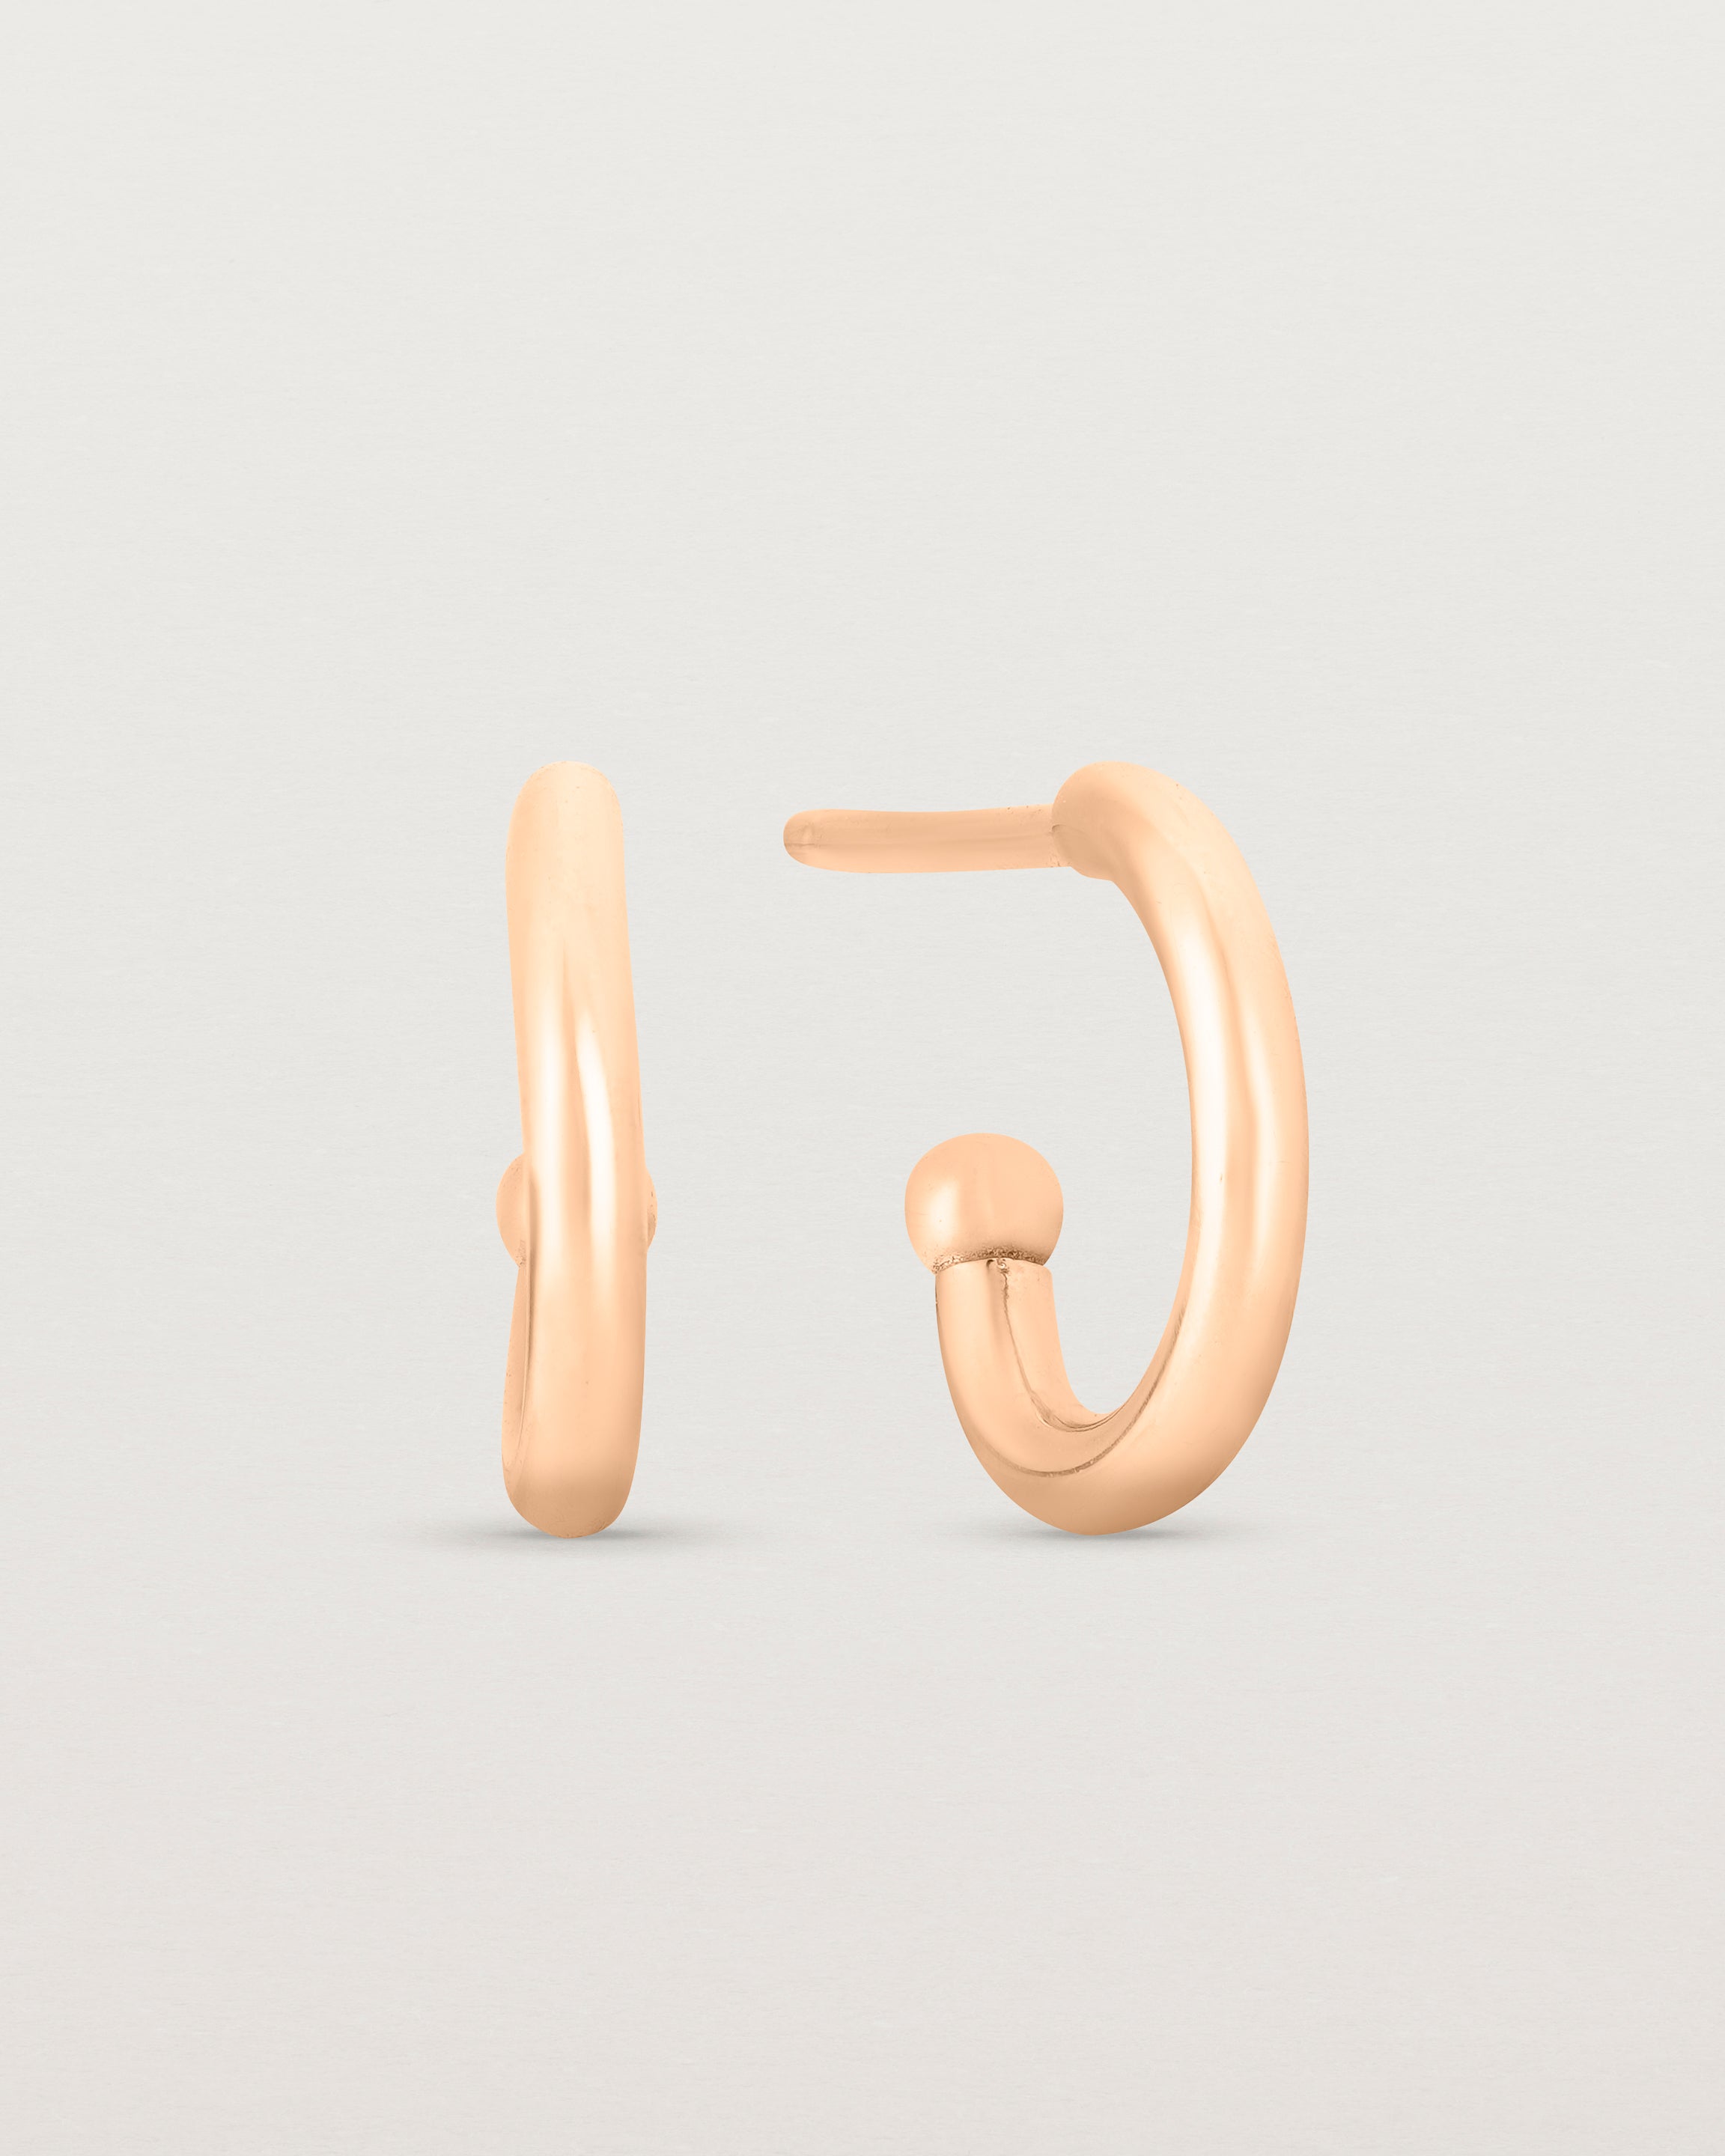 Image of the petits suspend hoops in rose gold